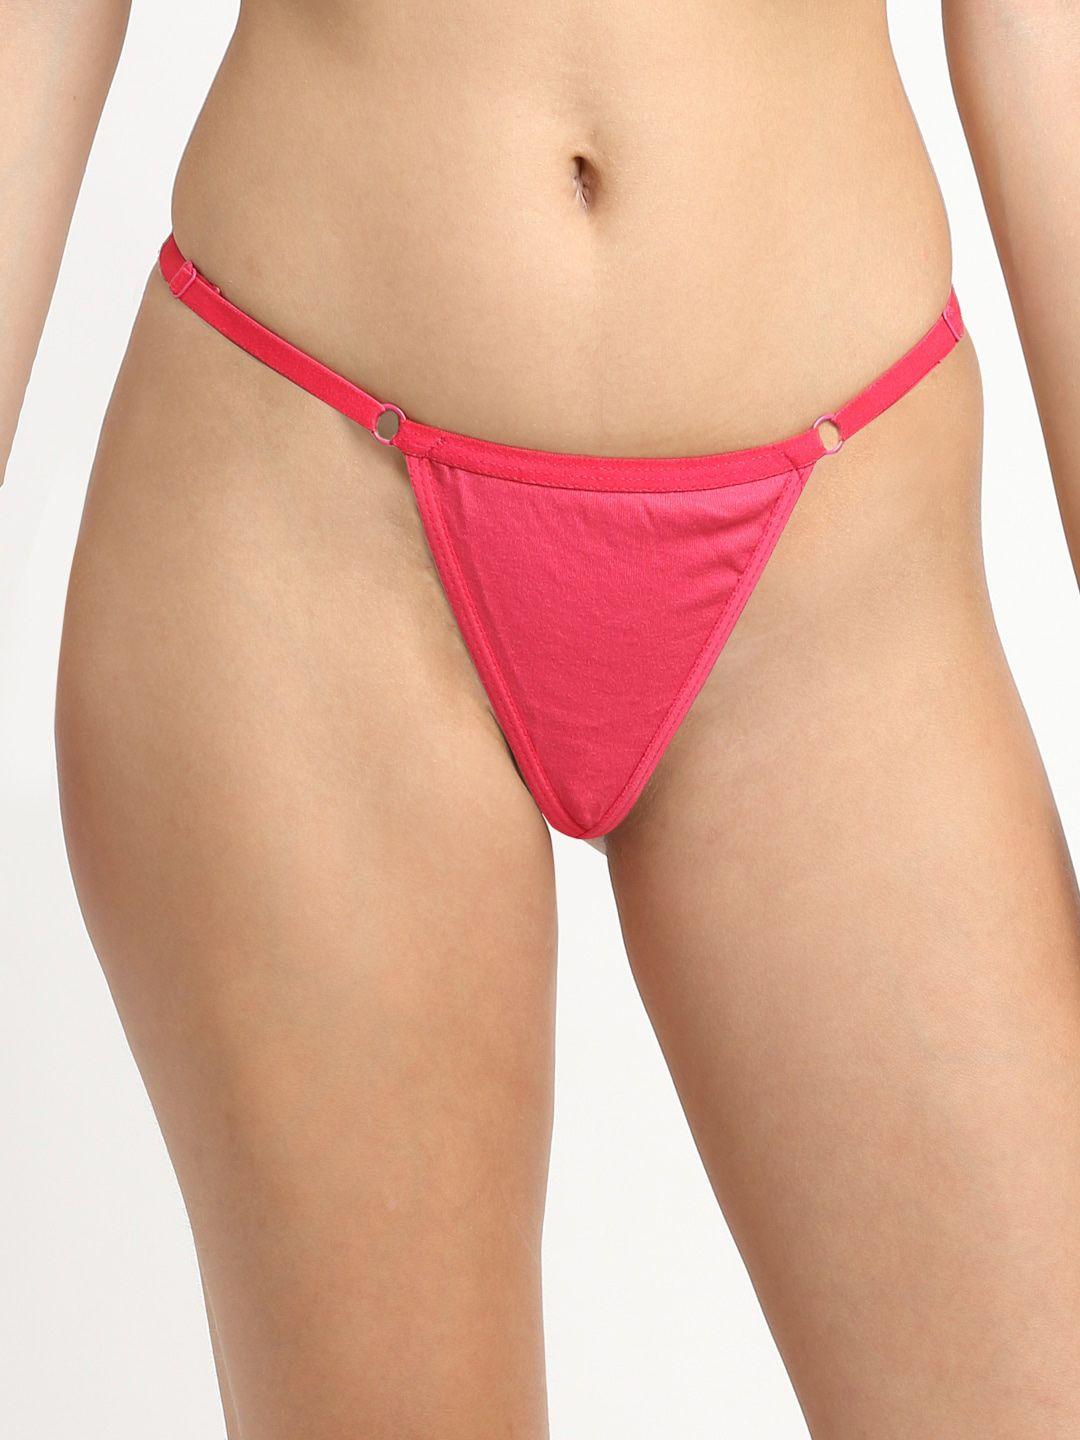 friskers-women-pink-solid-thongs-o-320-07-s